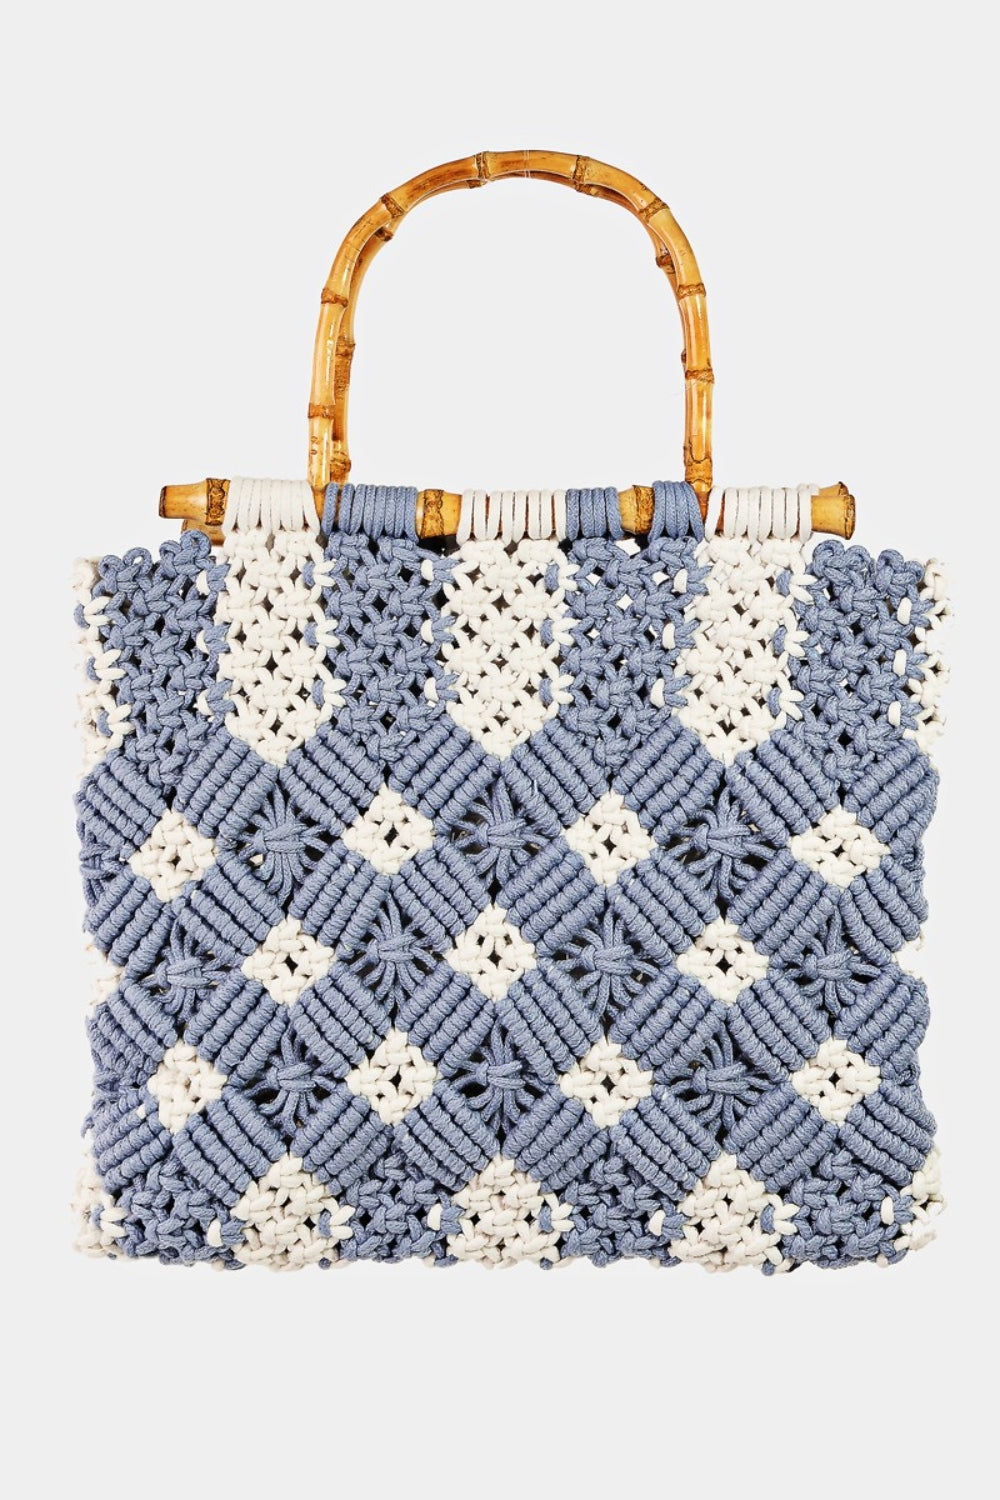 Fame Wooden Handle Braided Handbag {Click for additional Options]